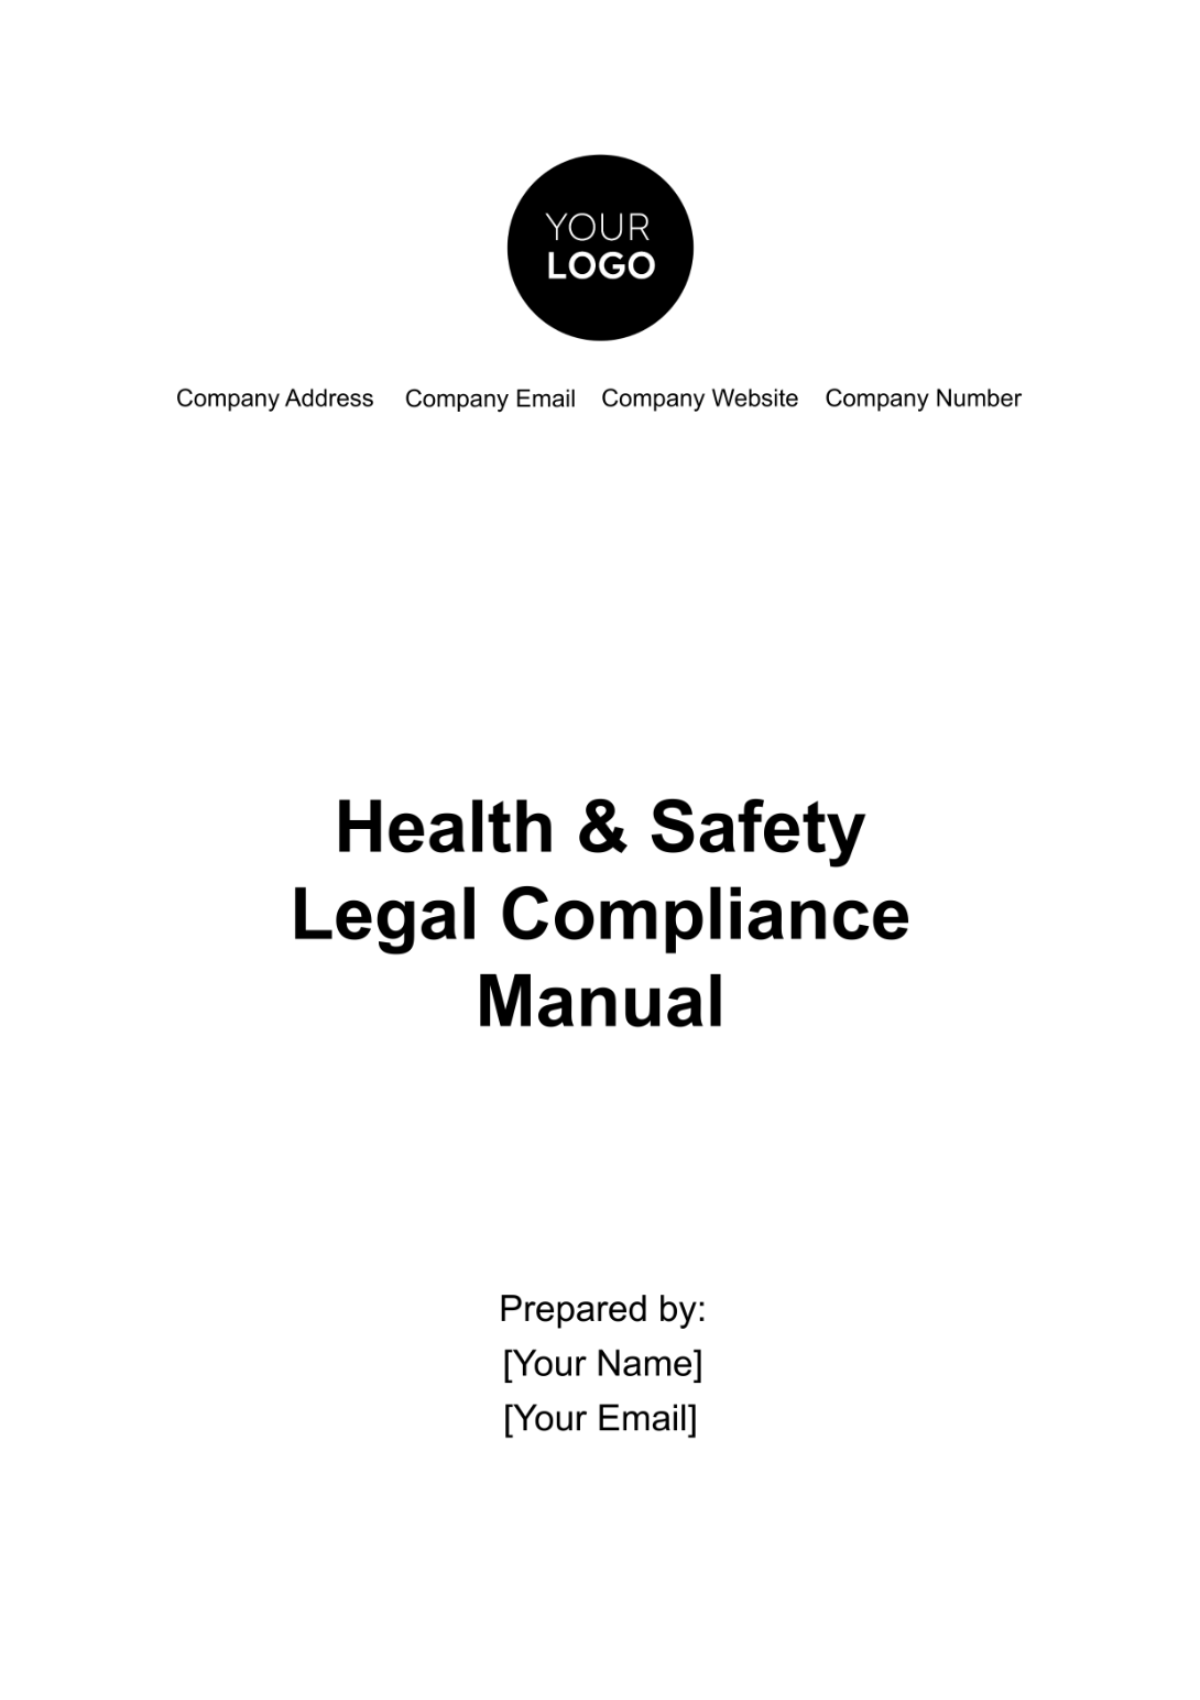 Free Health & Safety Legal Compliance Manual Template